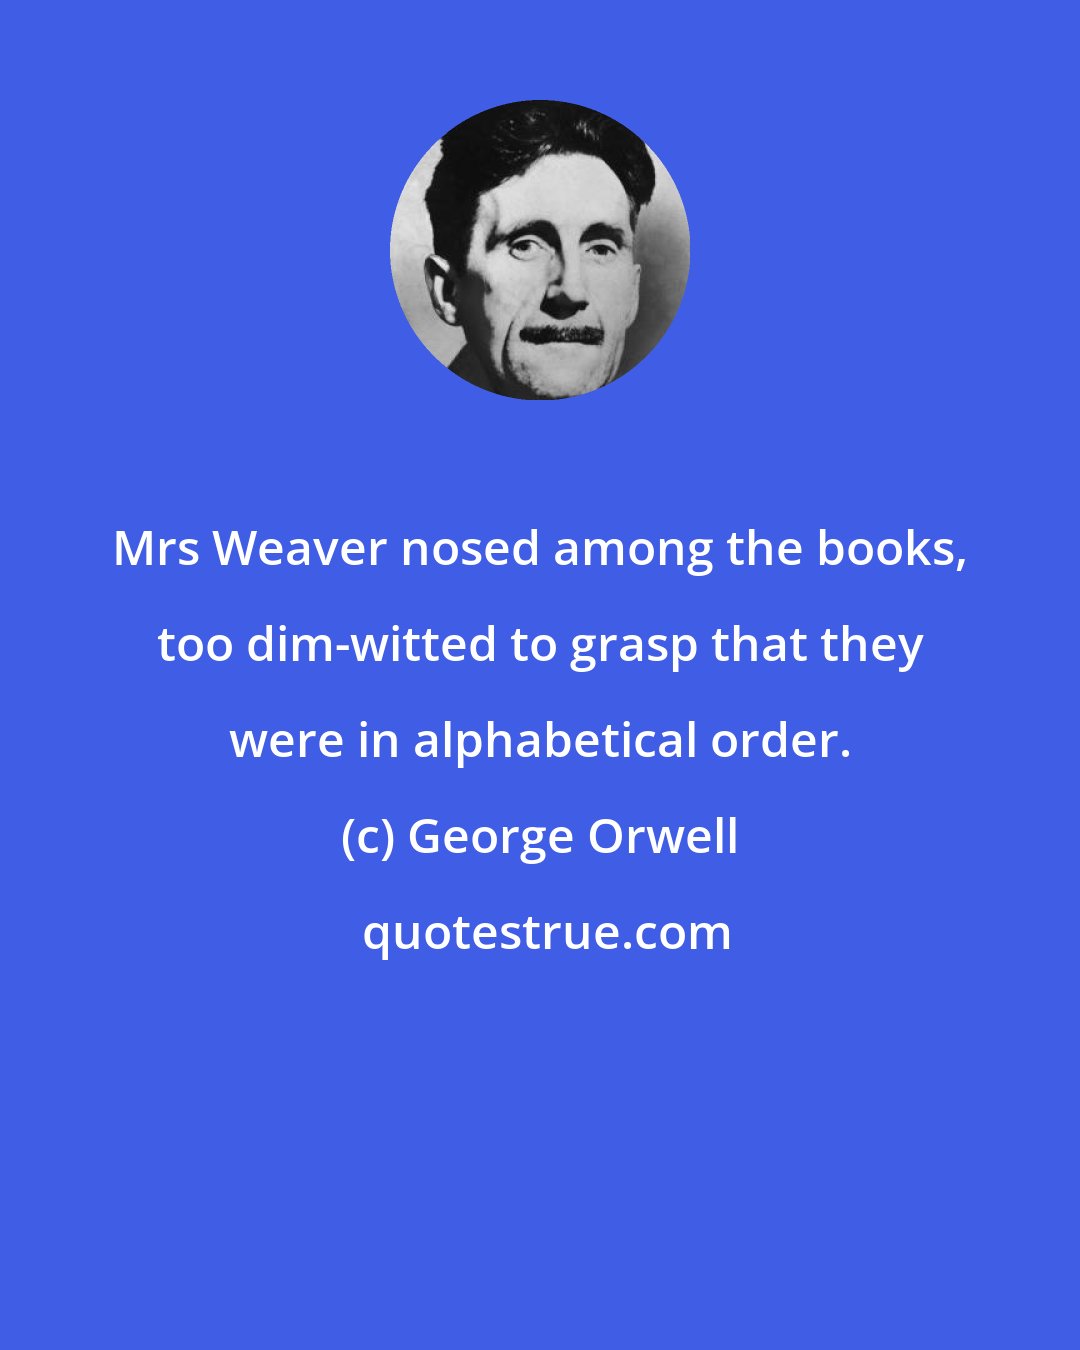 George Orwell: Mrs Weaver nosed among the books, too dim-witted to grasp that they were in alphabetical order.